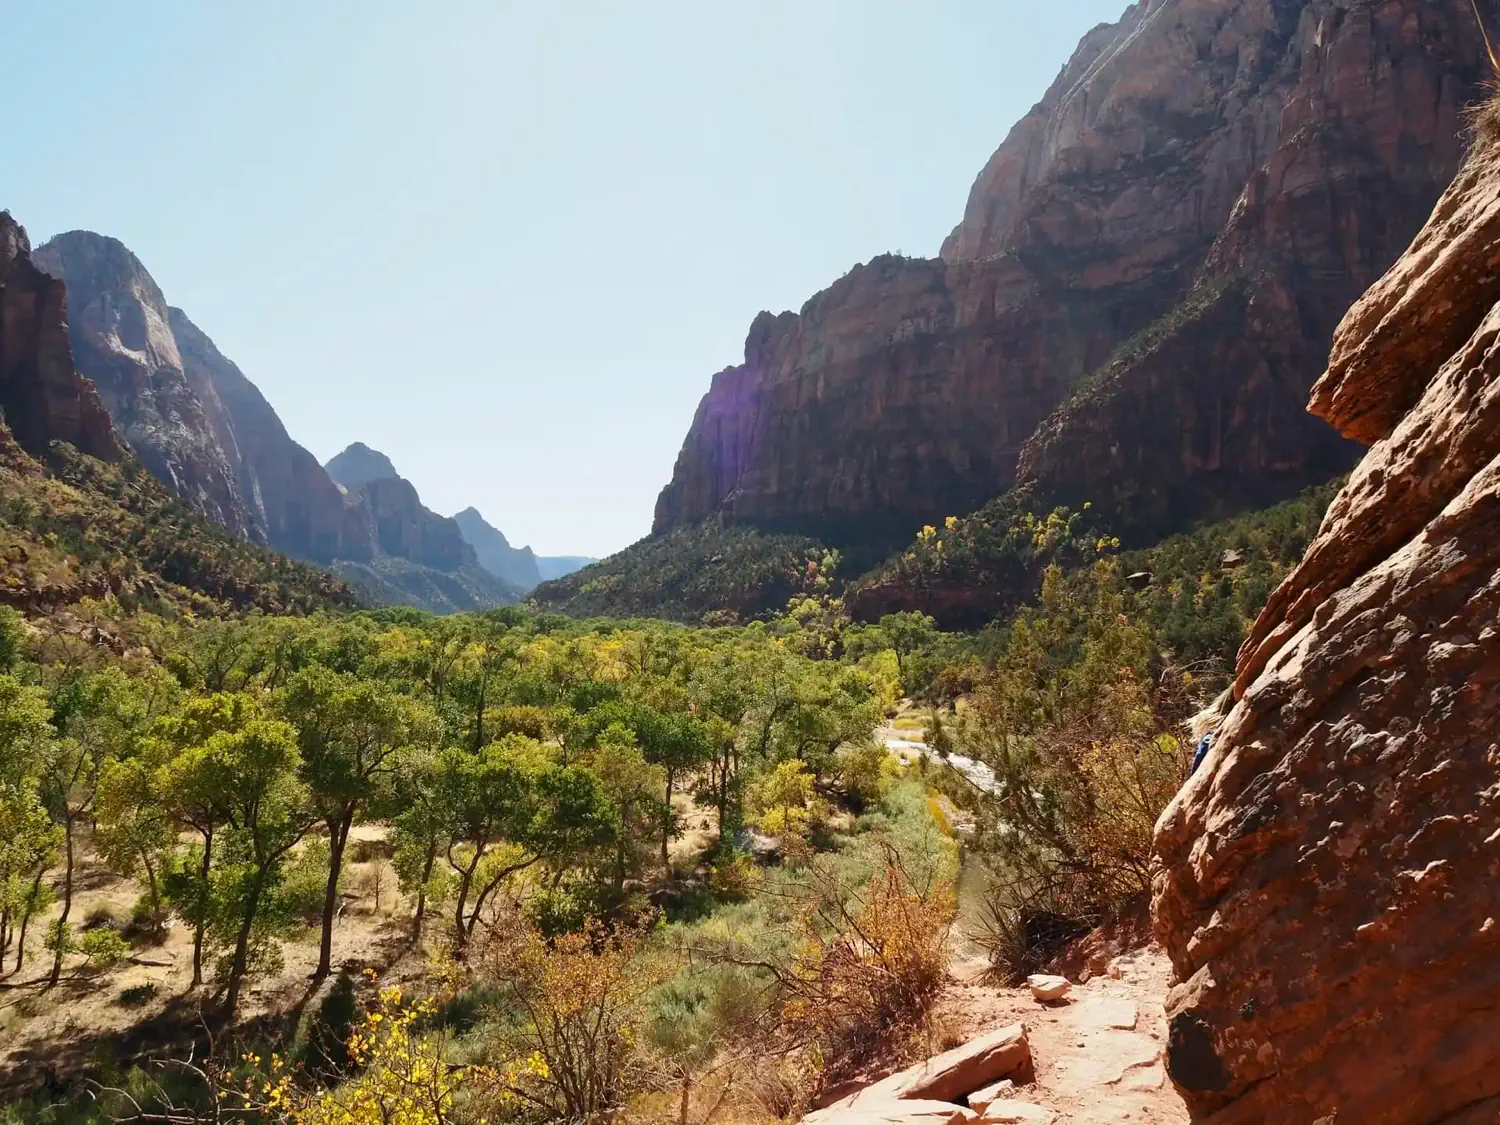 An incredible view of Zion Canyon from the Kayenta Trail